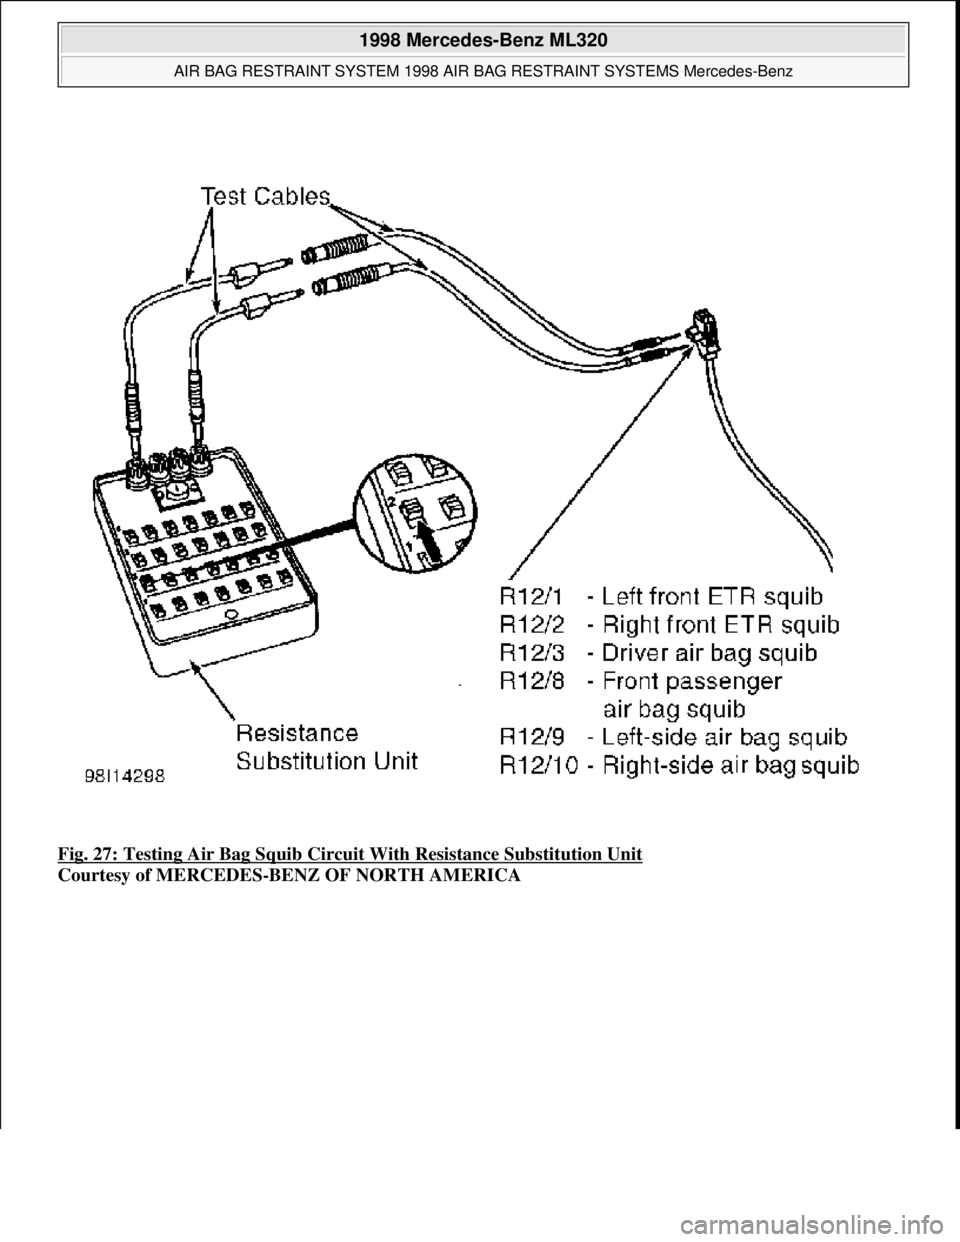 MERCEDES-BENZ ML350 1997  Complete Owners Guide Fig. 27: Testing Air Bag Squib Circuit  With Resistance Substitution Unit  
Courtesy of MERCEDES-BENZ OF NORTH AMERICA
 
1998 Mercedes-Benz ML320 
AIR BAG RESTRAINT SYSTEM 1998 AIR   BAG RESTRAINT SYS